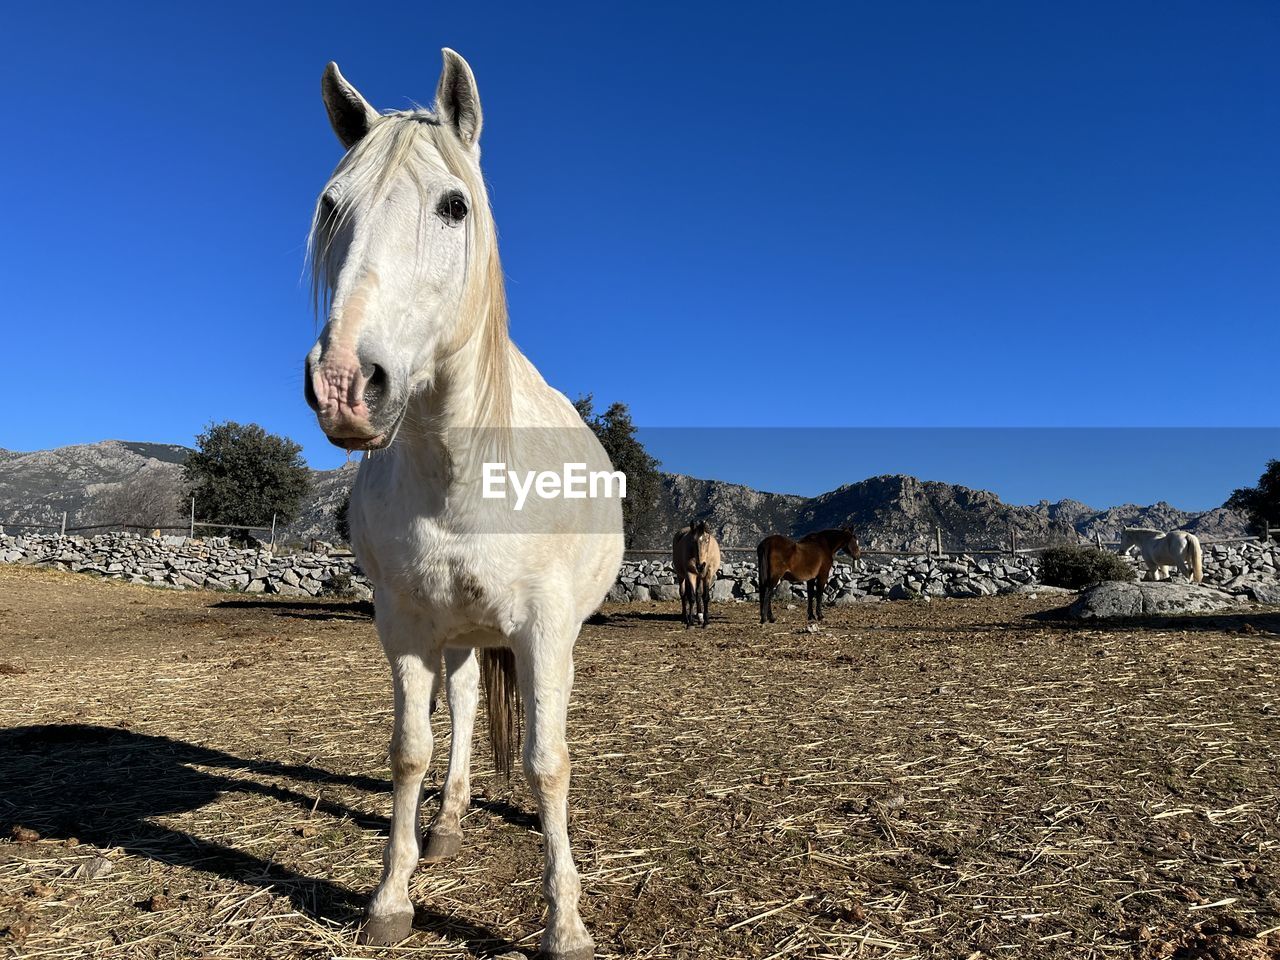 animal, animal themes, mammal, horse, domestic animals, pet, livestock, one animal, mustang horse, sky, nature, animal wildlife, clear sky, landscape, blue, working animal, no people, sunlight, land, pack animal, sunny, day, standing, environment, donkey, mare, stallion, outdoors, portrait, mountain, white, rural scene, agriculture, herbivorous